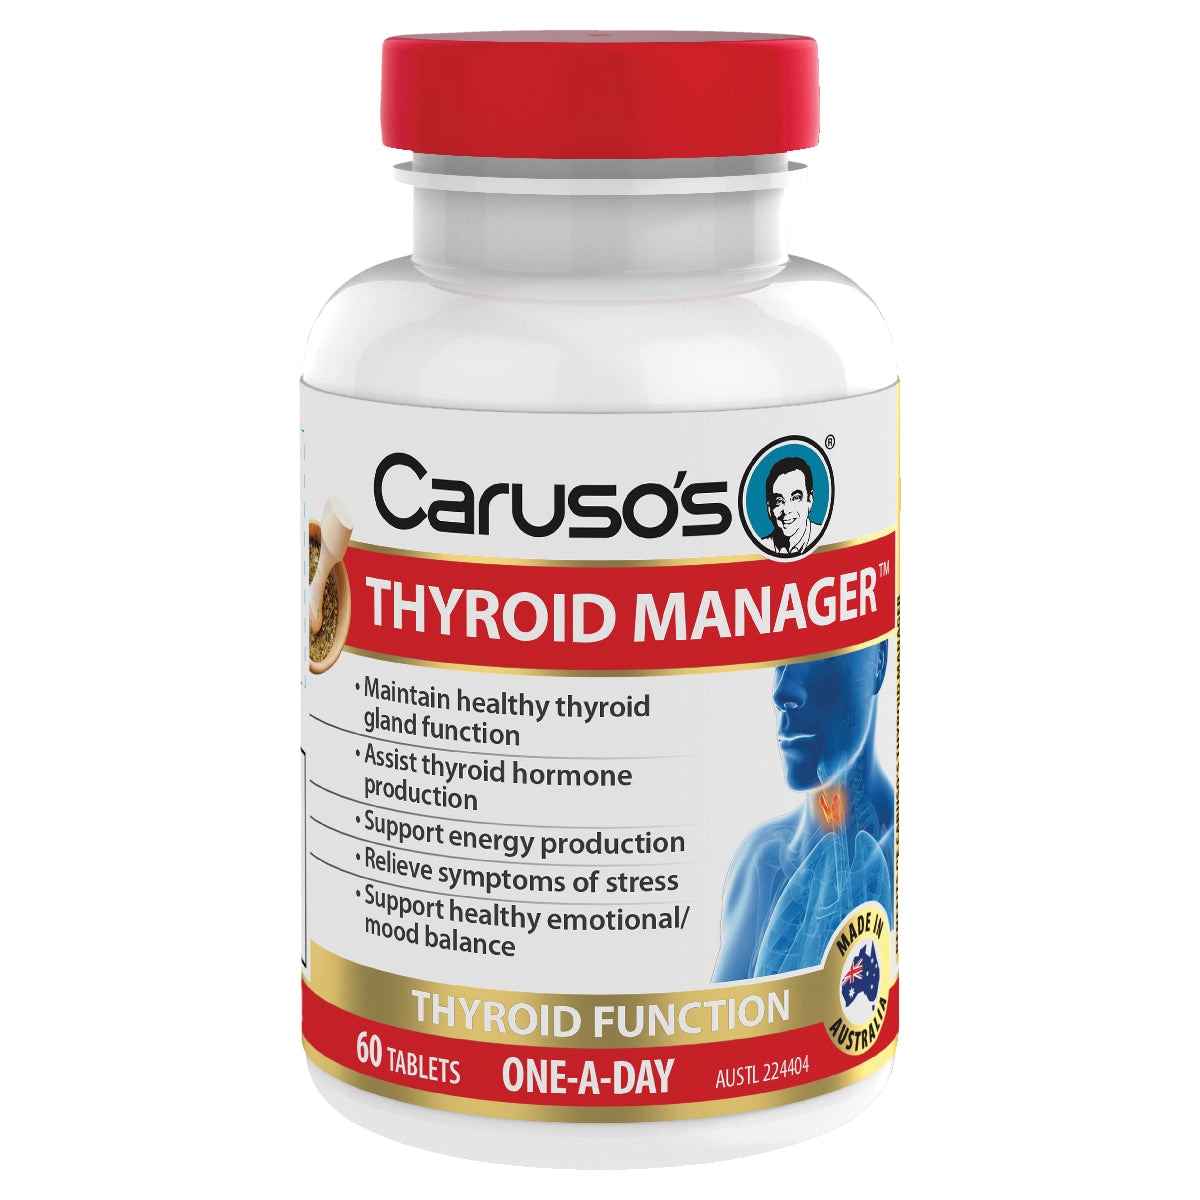 Carusos Thyroid Manager 60 Tablets Australia